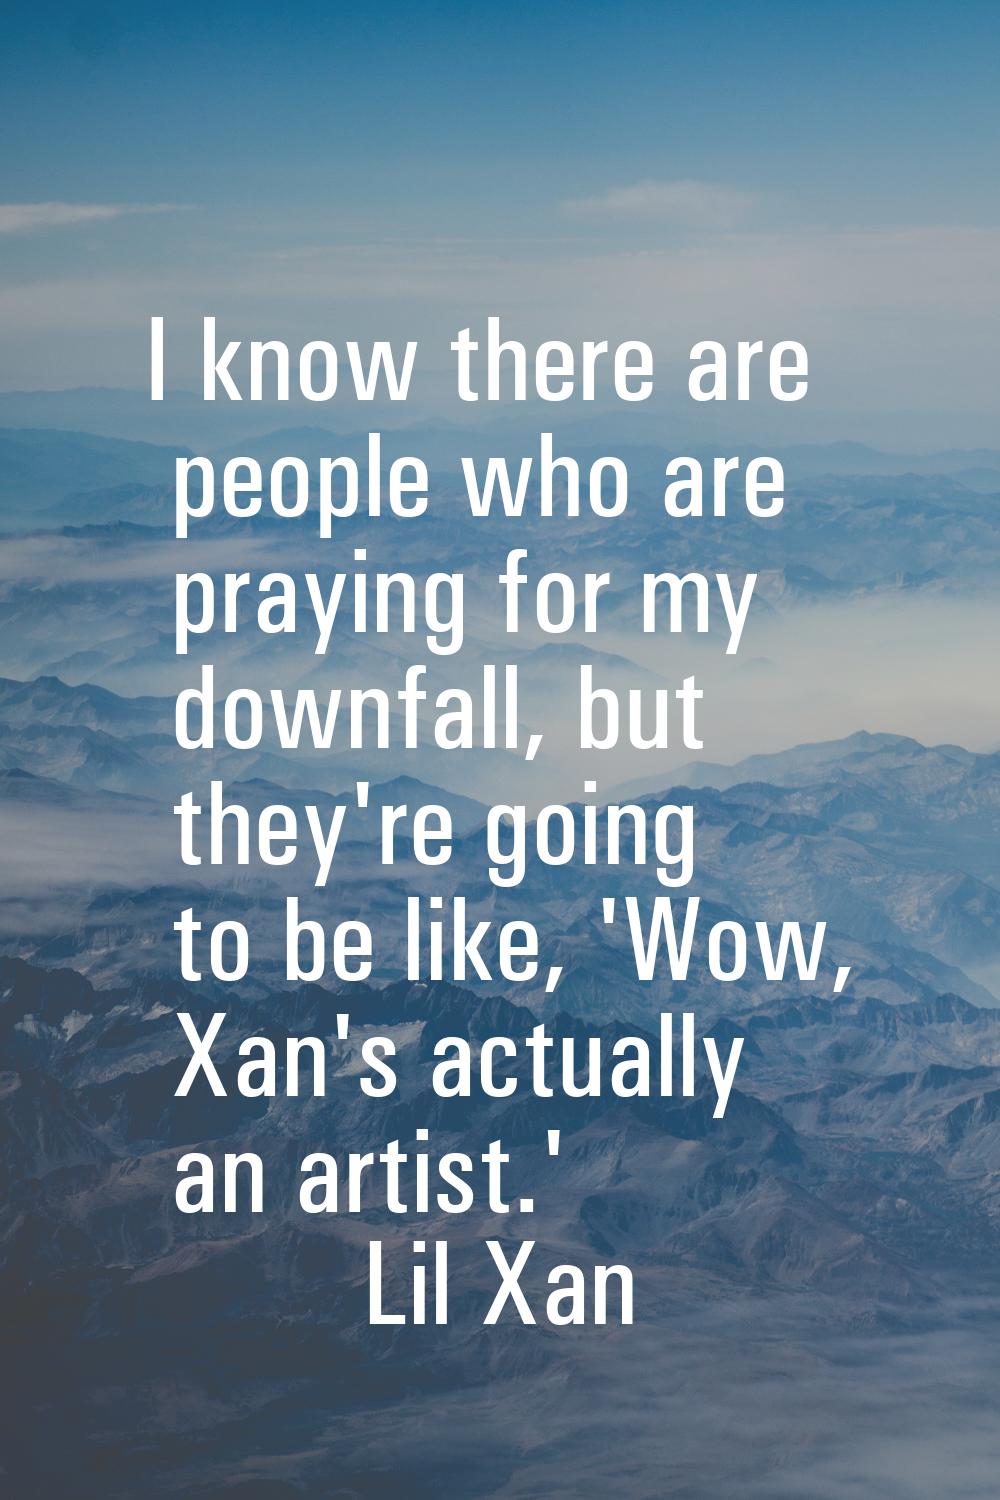 I know there are people who are praying for my downfall, but they're going to be like, 'Wow, Xan's 